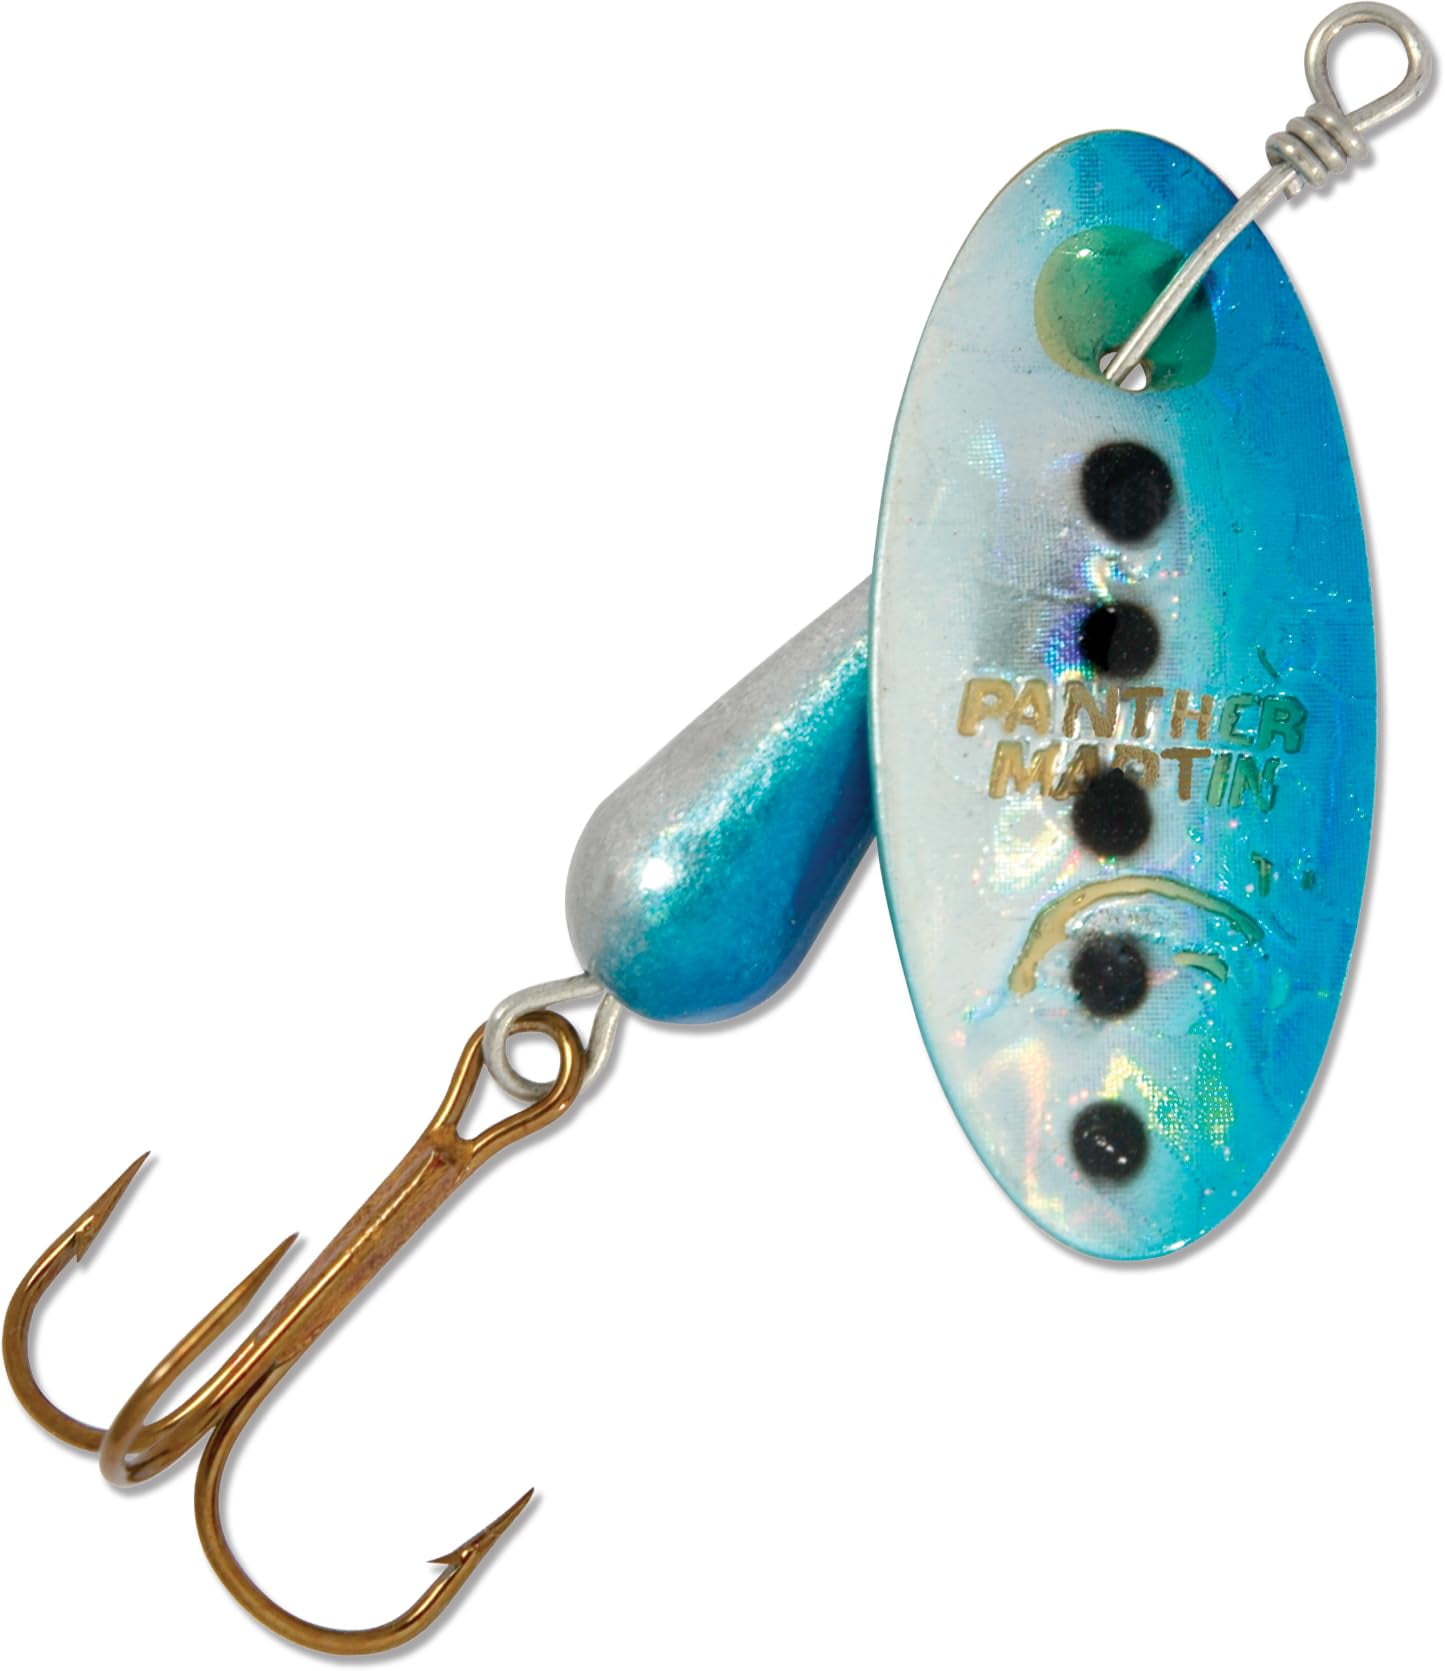 Panther Martin PMH_6_SBH Classic Holographic Spinners Fishing Lure -  Silver/Blue Holographic - 6 (1/4 oz) 